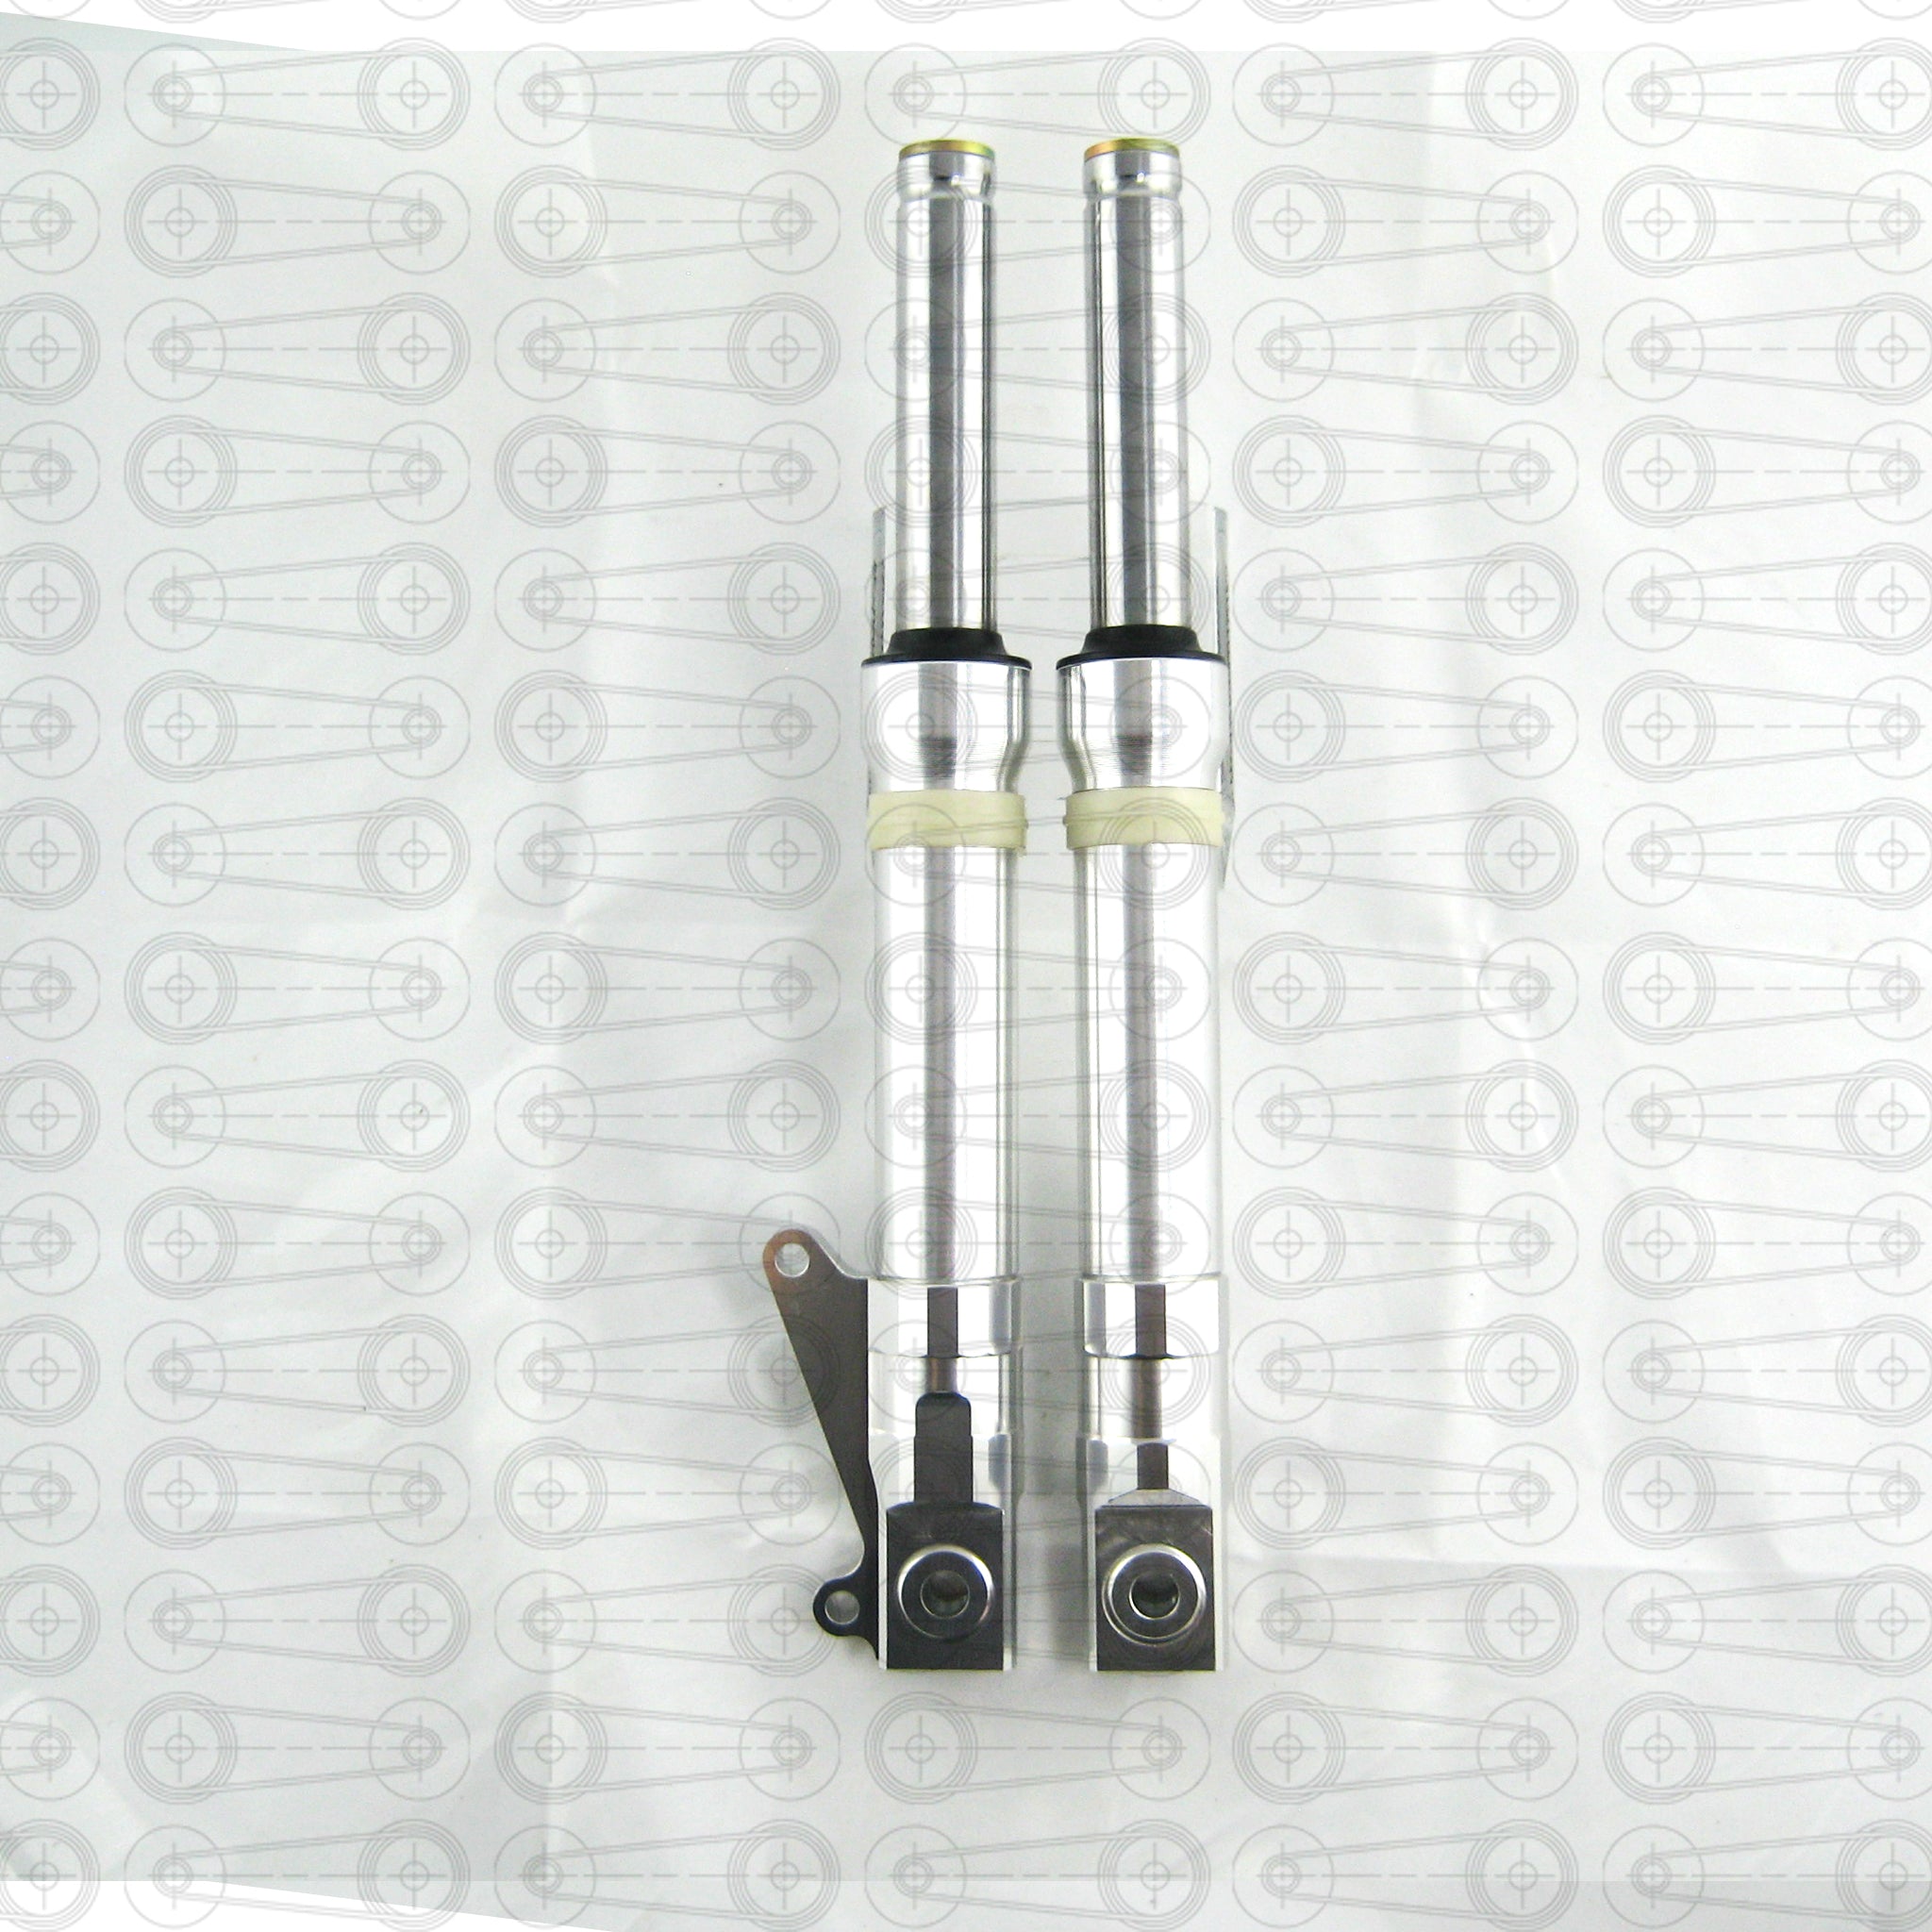 Performance - Front Forks (DIO)